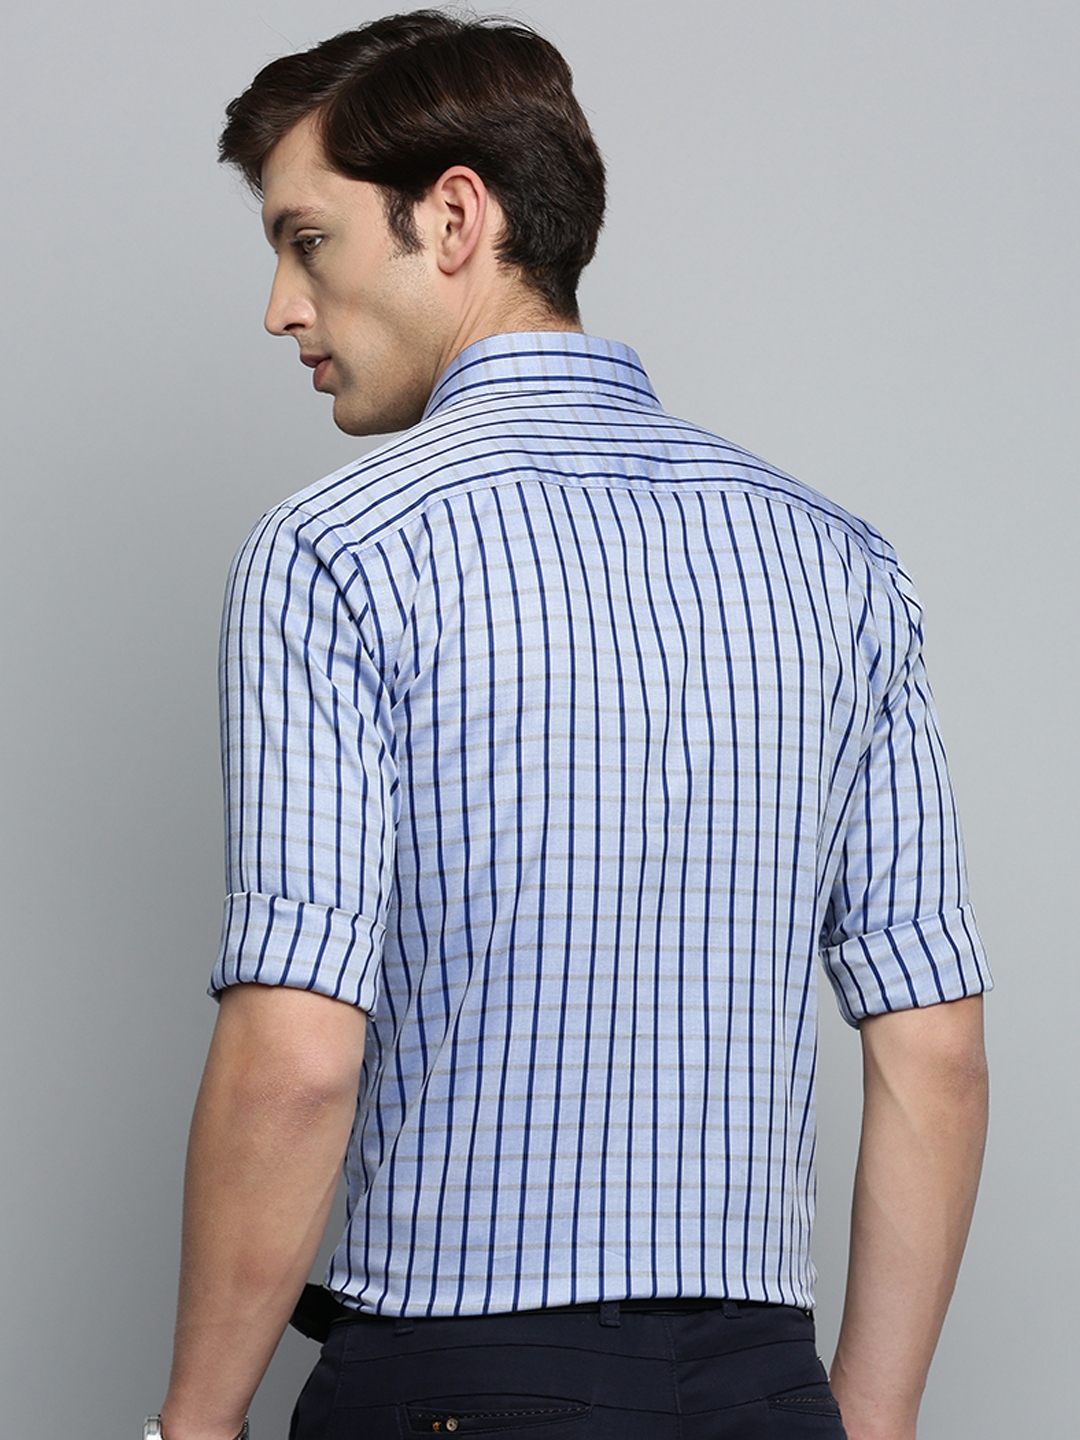 Showoff | SHOWOFF Men's Spread Collar Checked Blue Classic Shirt 3